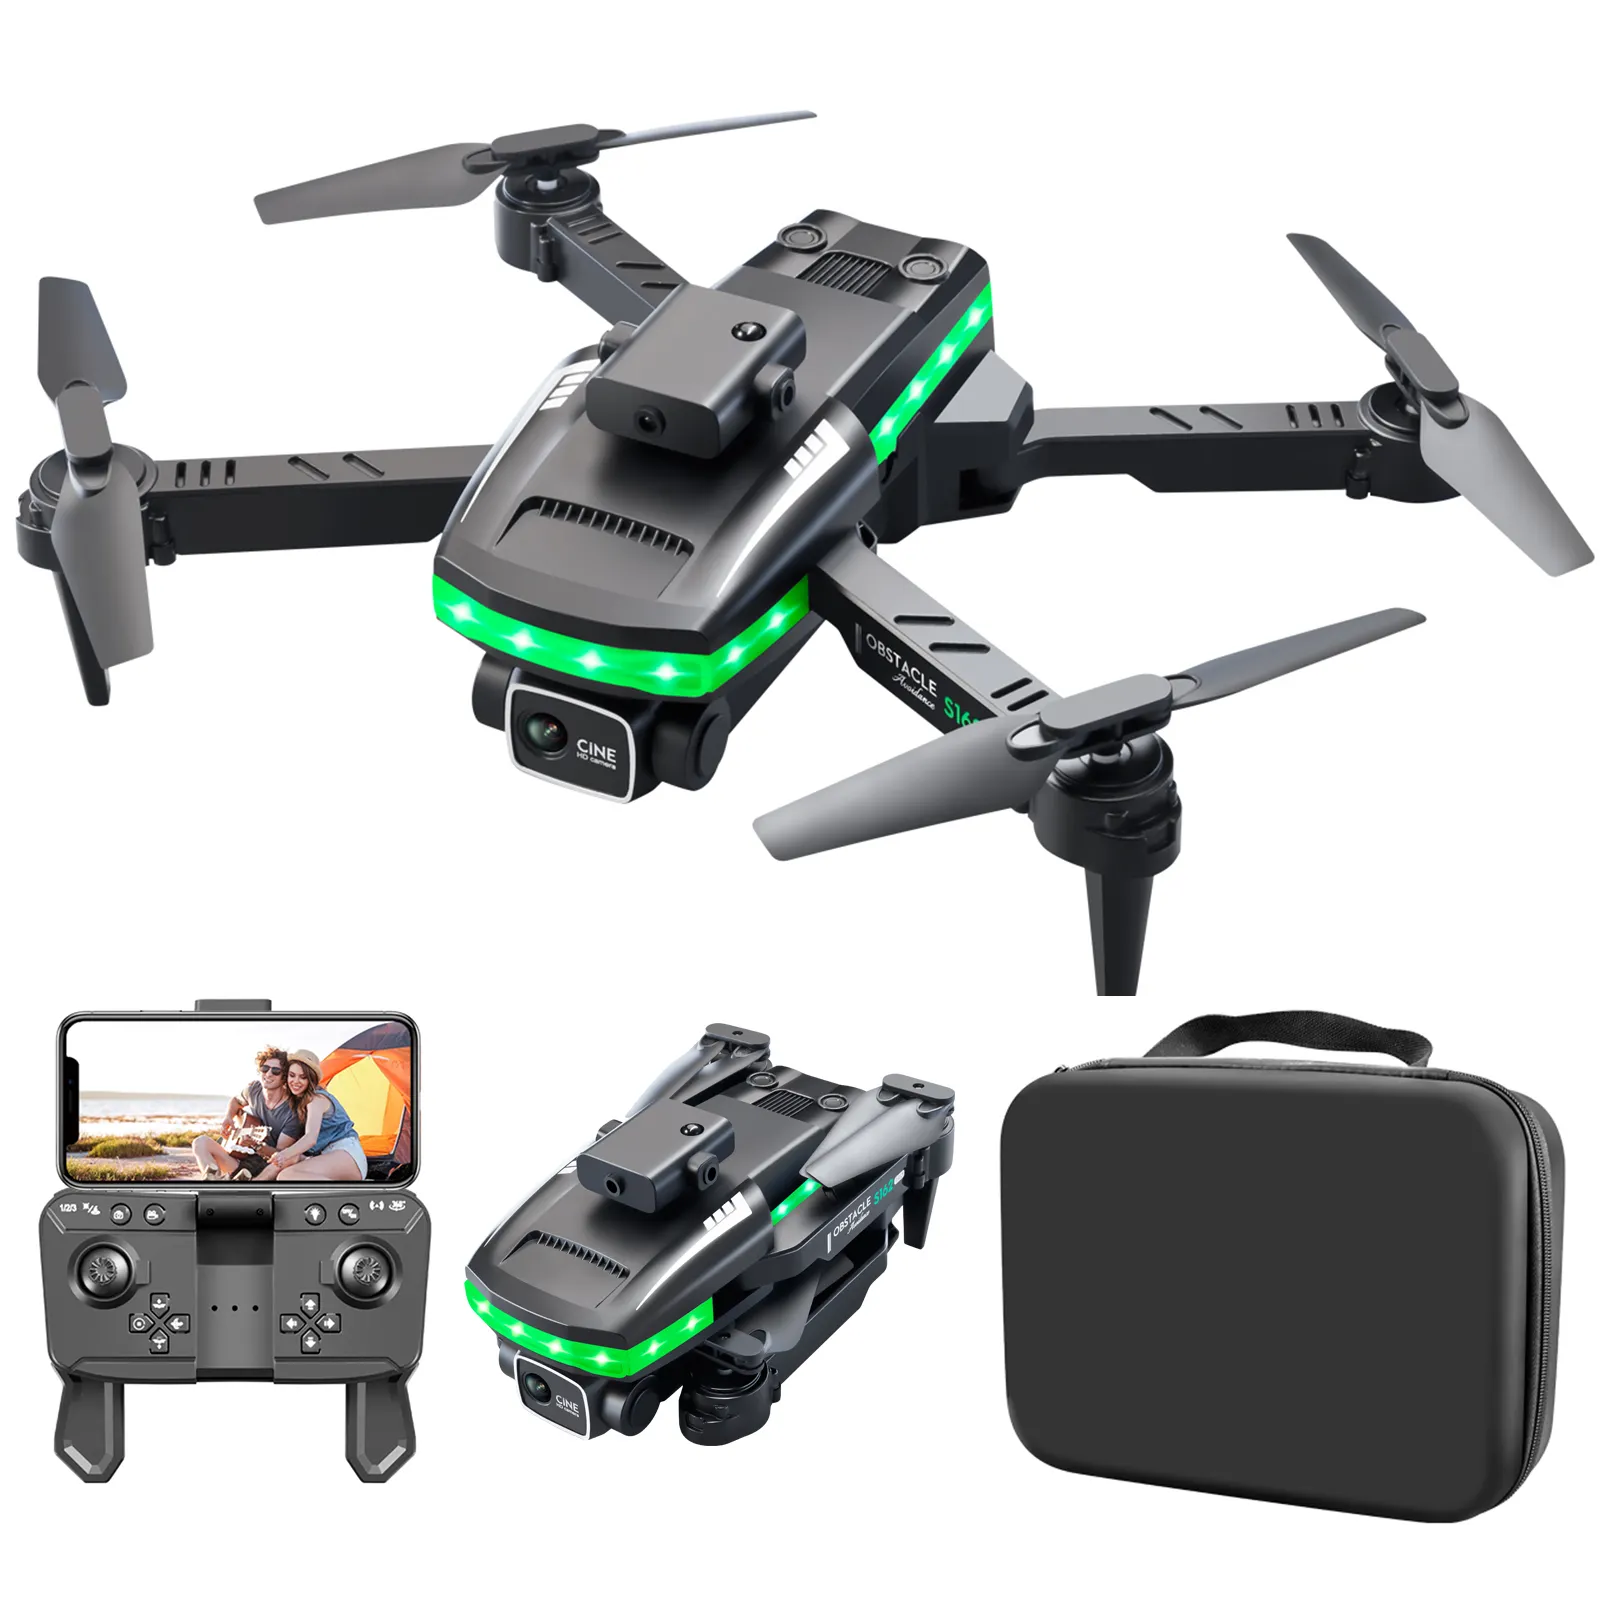 LED Cool Night Flight 10 Minutes Battery Life 4K HD Dual Camera Lens Switching Broader Vision Light Remote Control S162 Drone